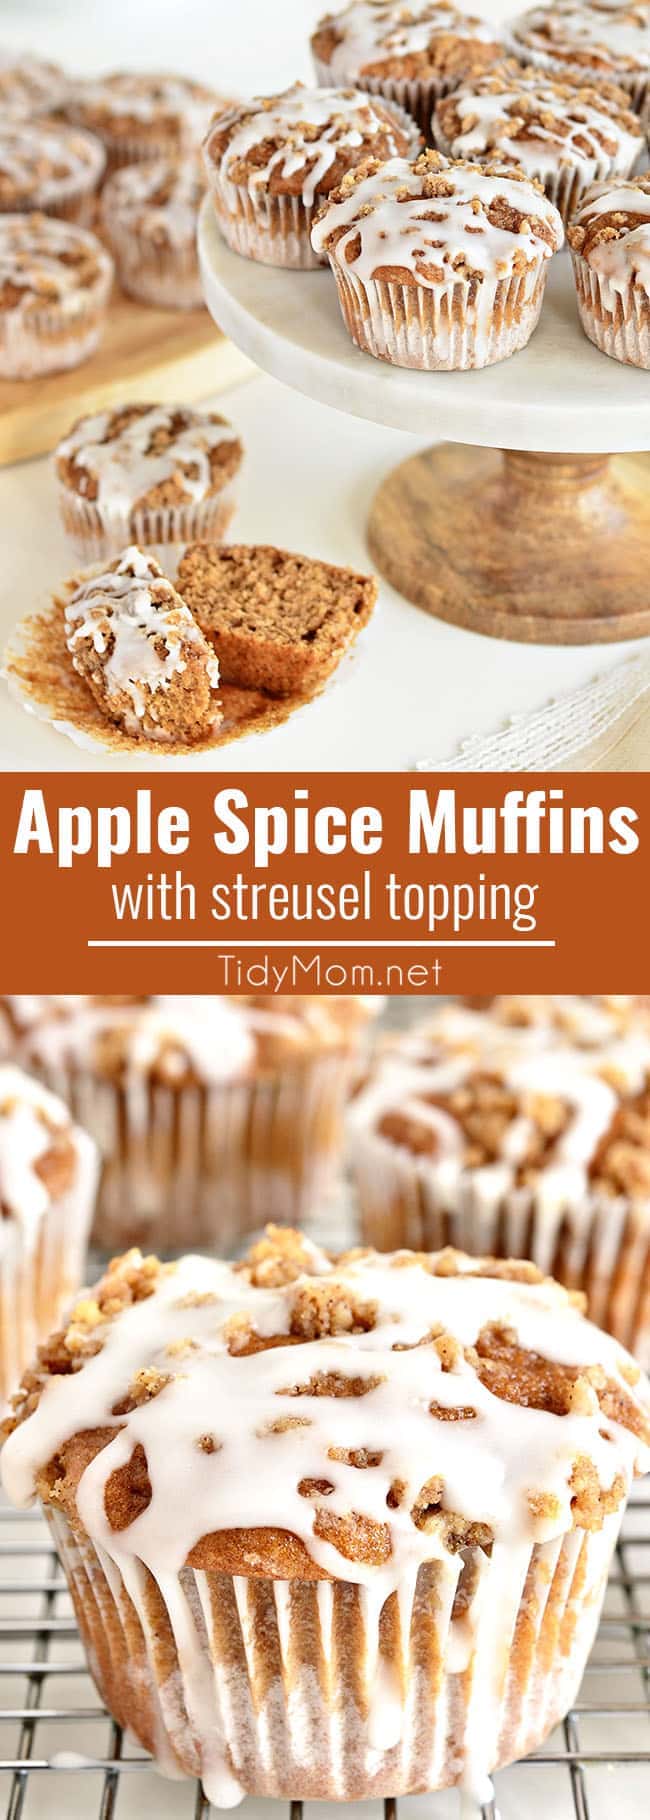 Apple Spice muffins with Streusel Topping photo collage 